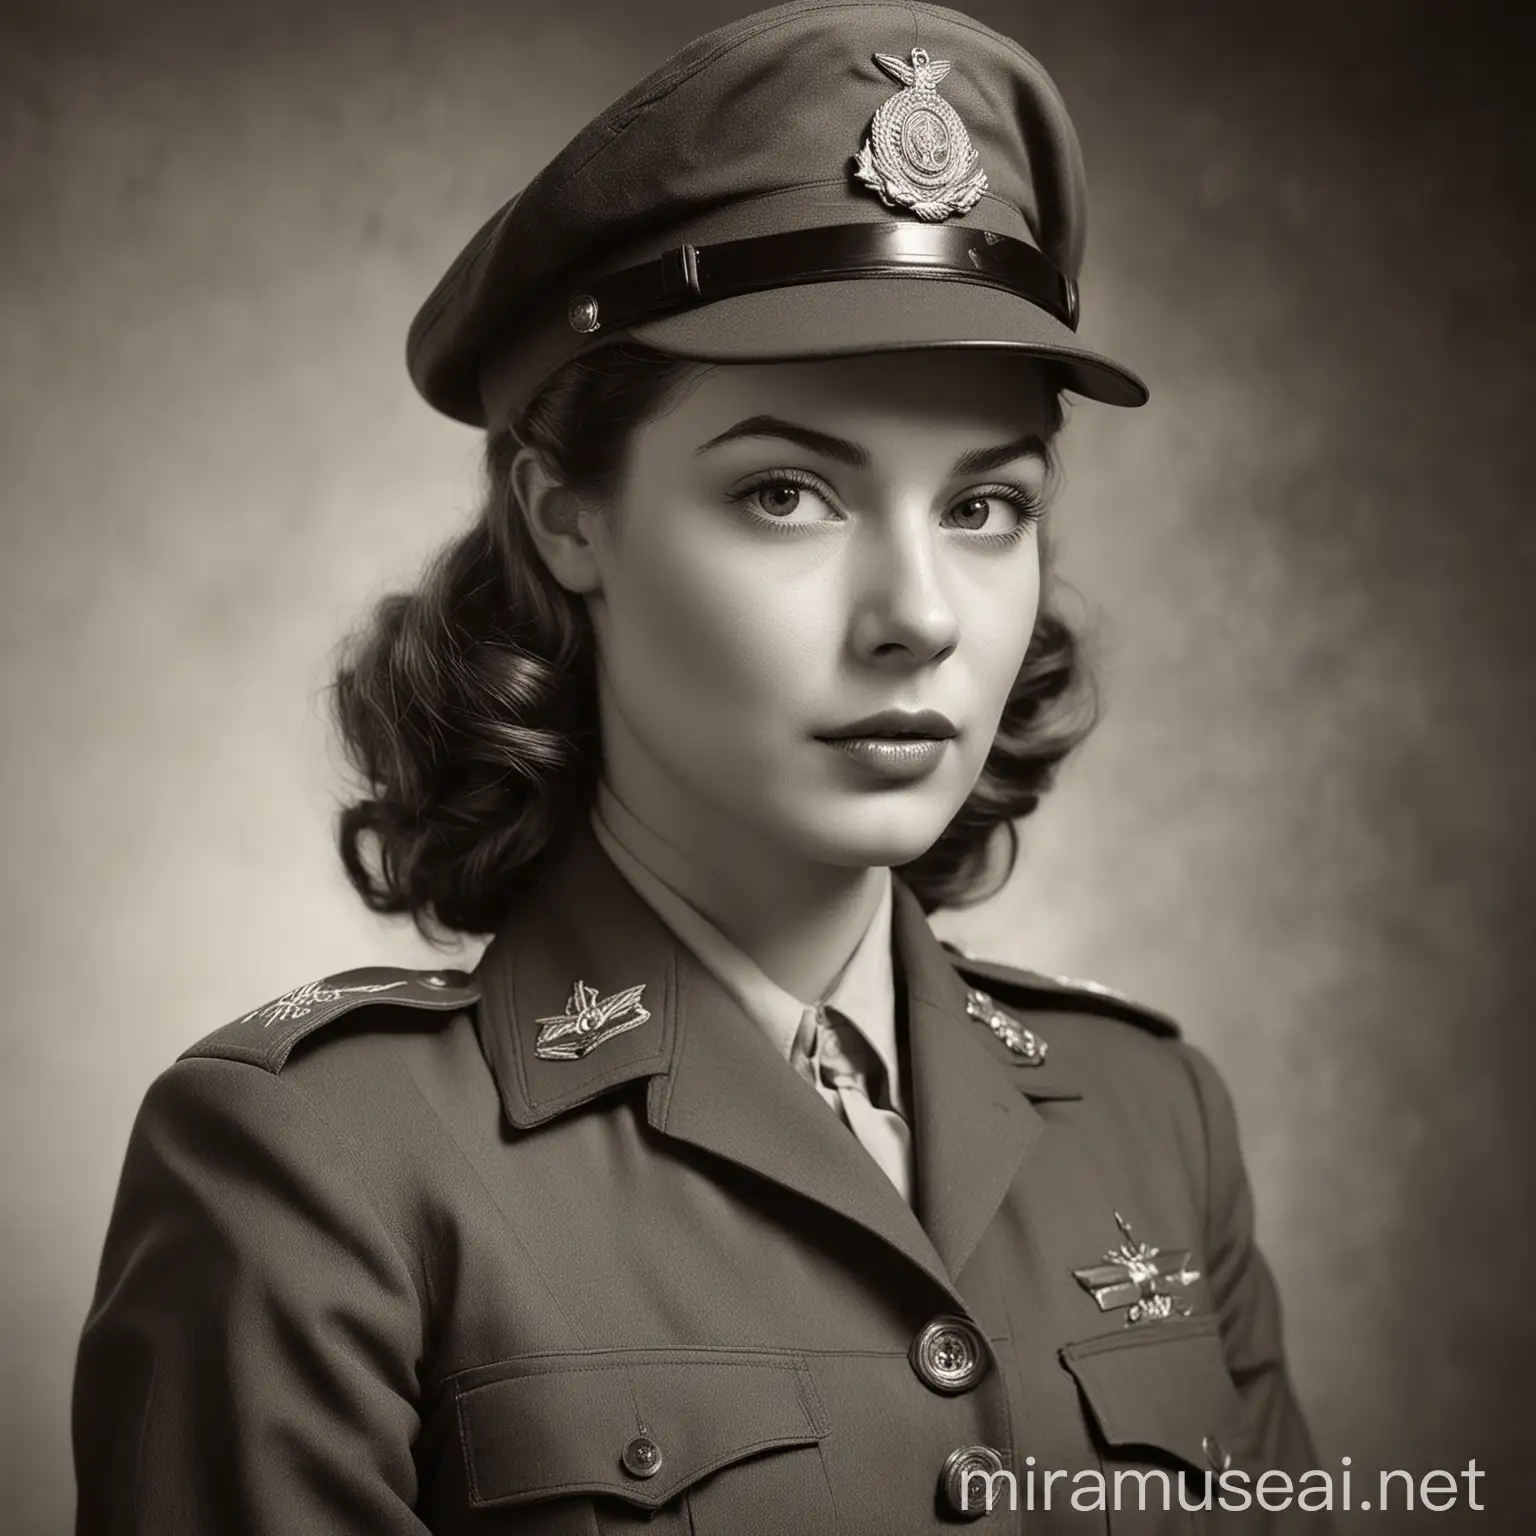 beautiful woman from the 1940s in a military uniform, realistic, vintage bw photograph